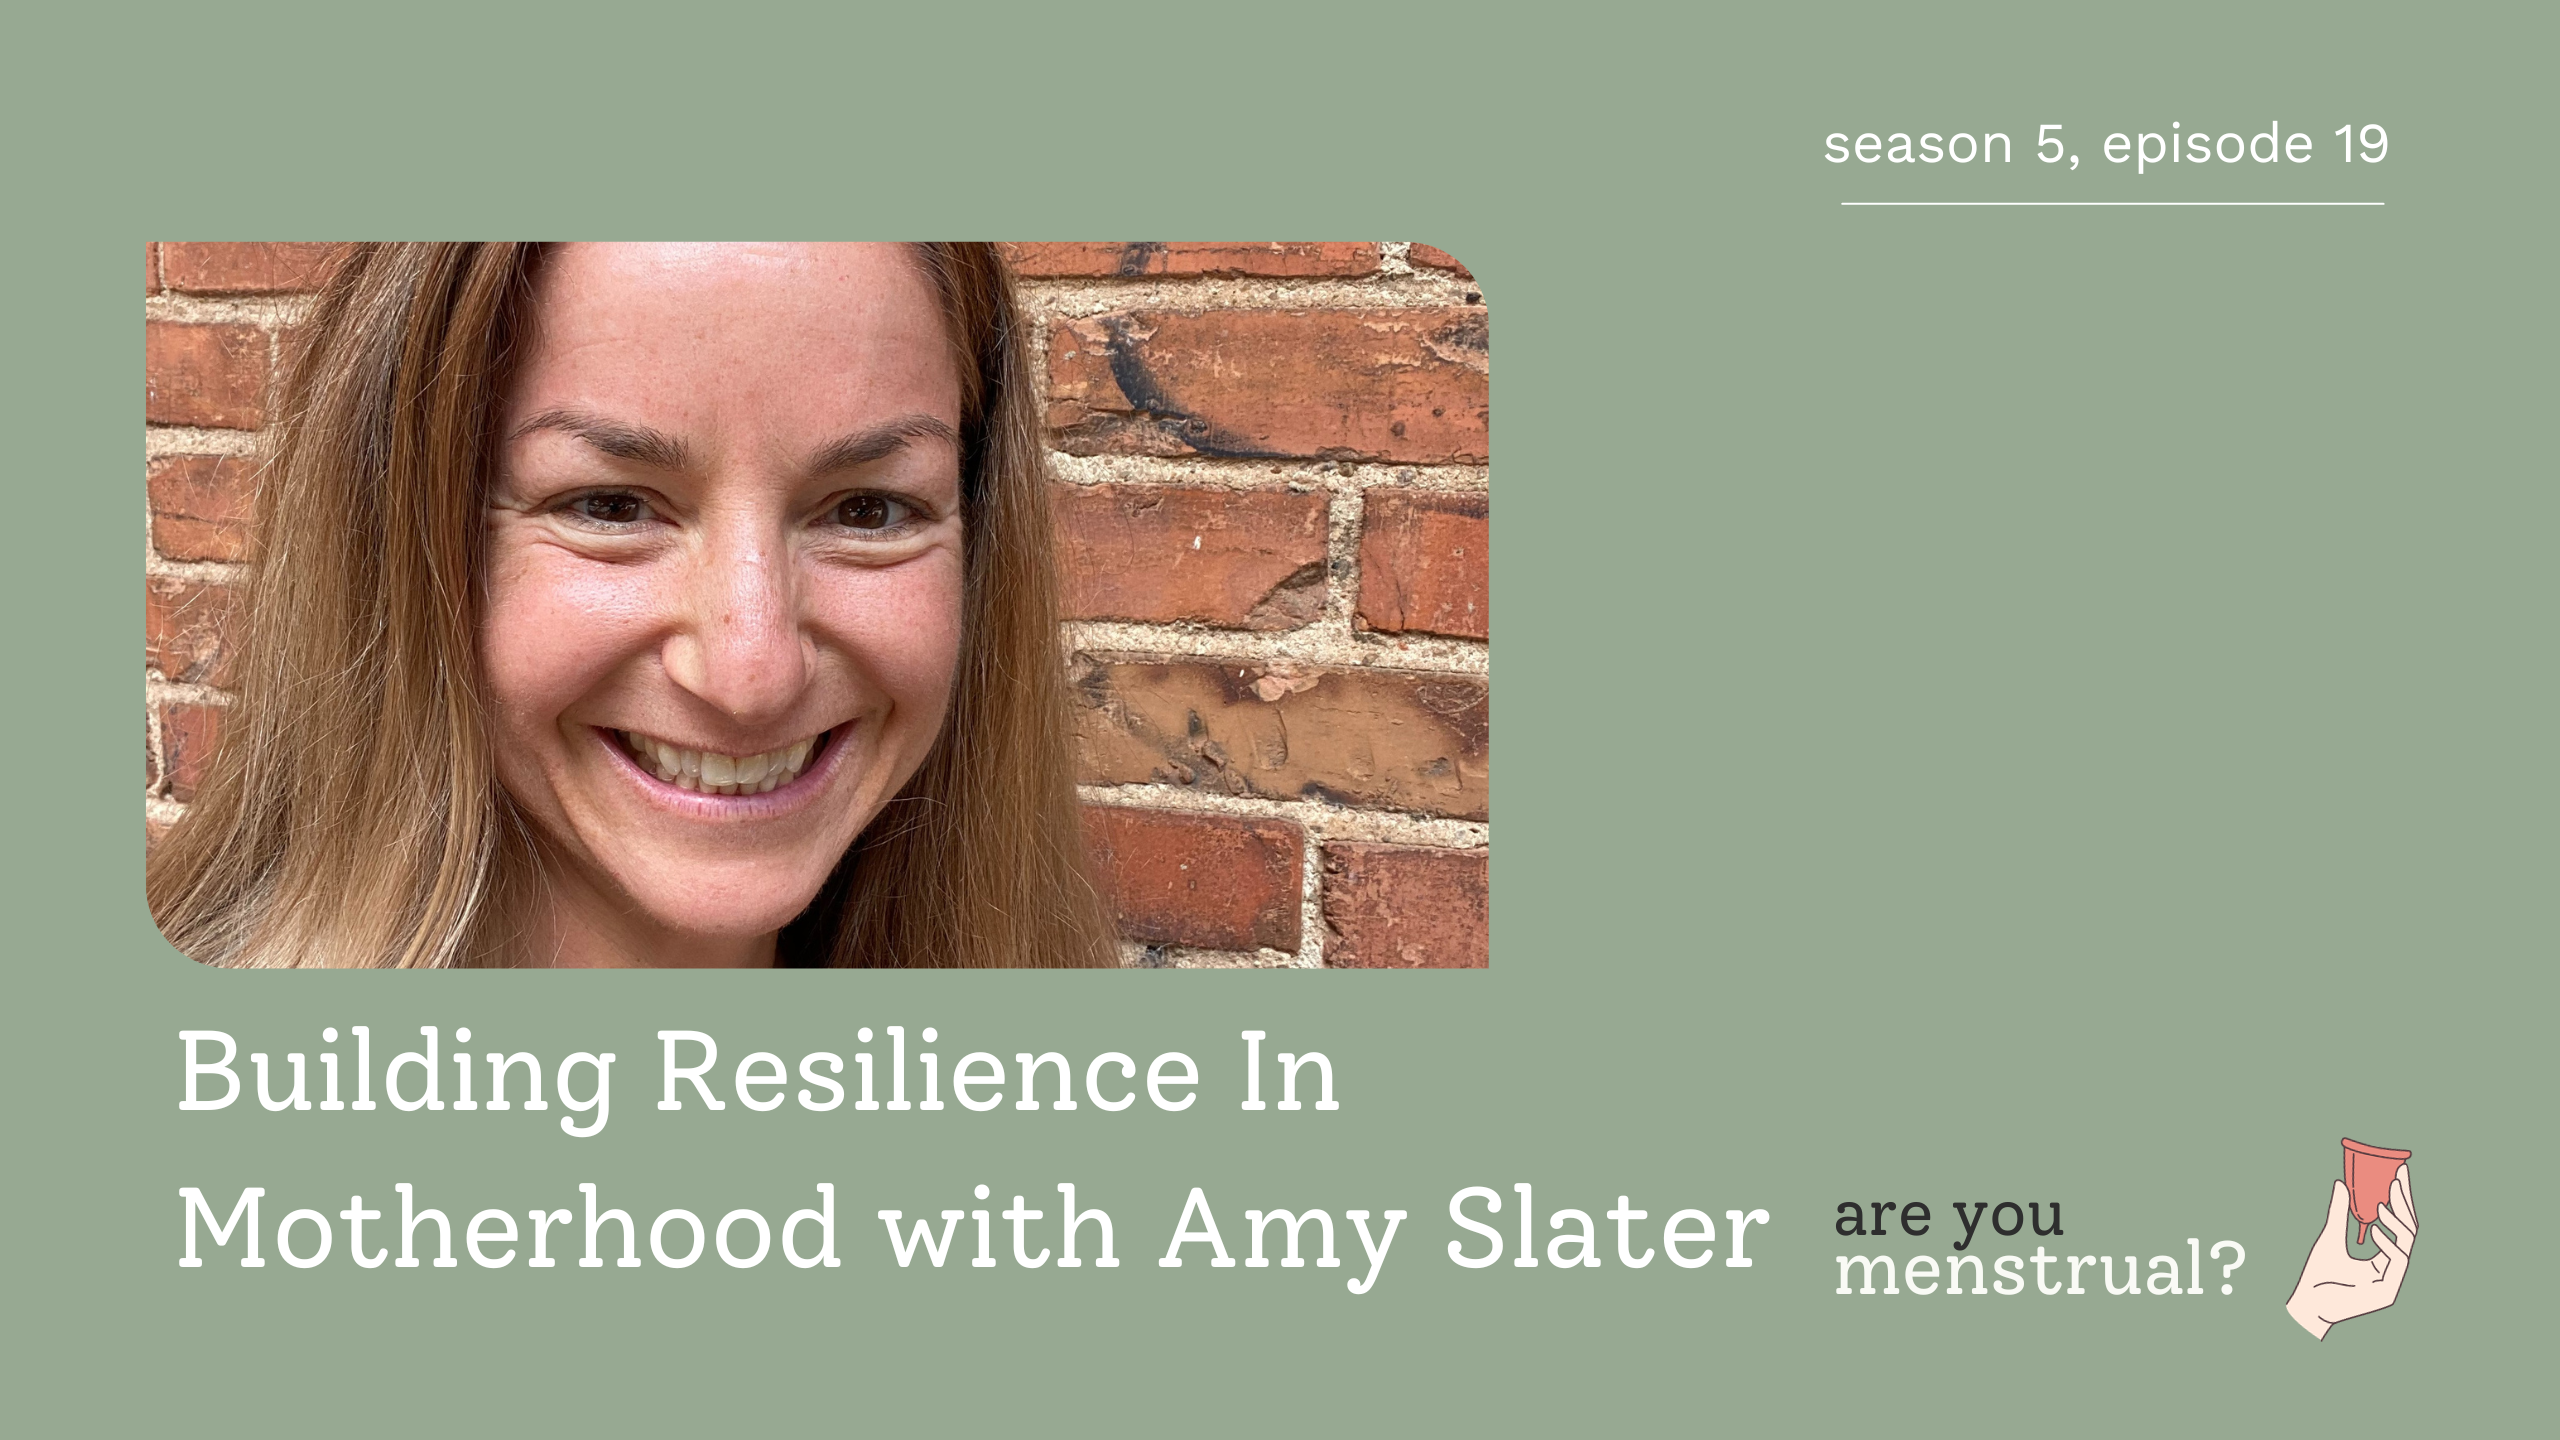 Building Resilience In Motherhood with Amy Slater